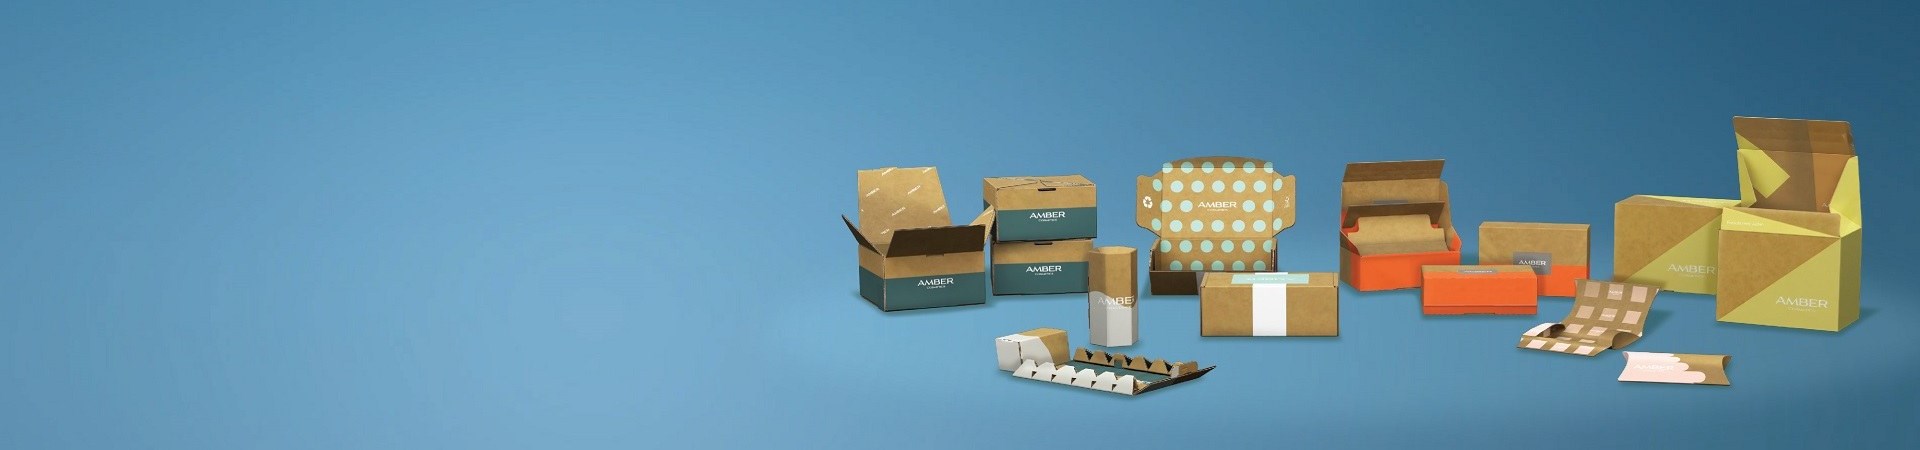 eCommerce Packaging, Health and Beauty Packaging